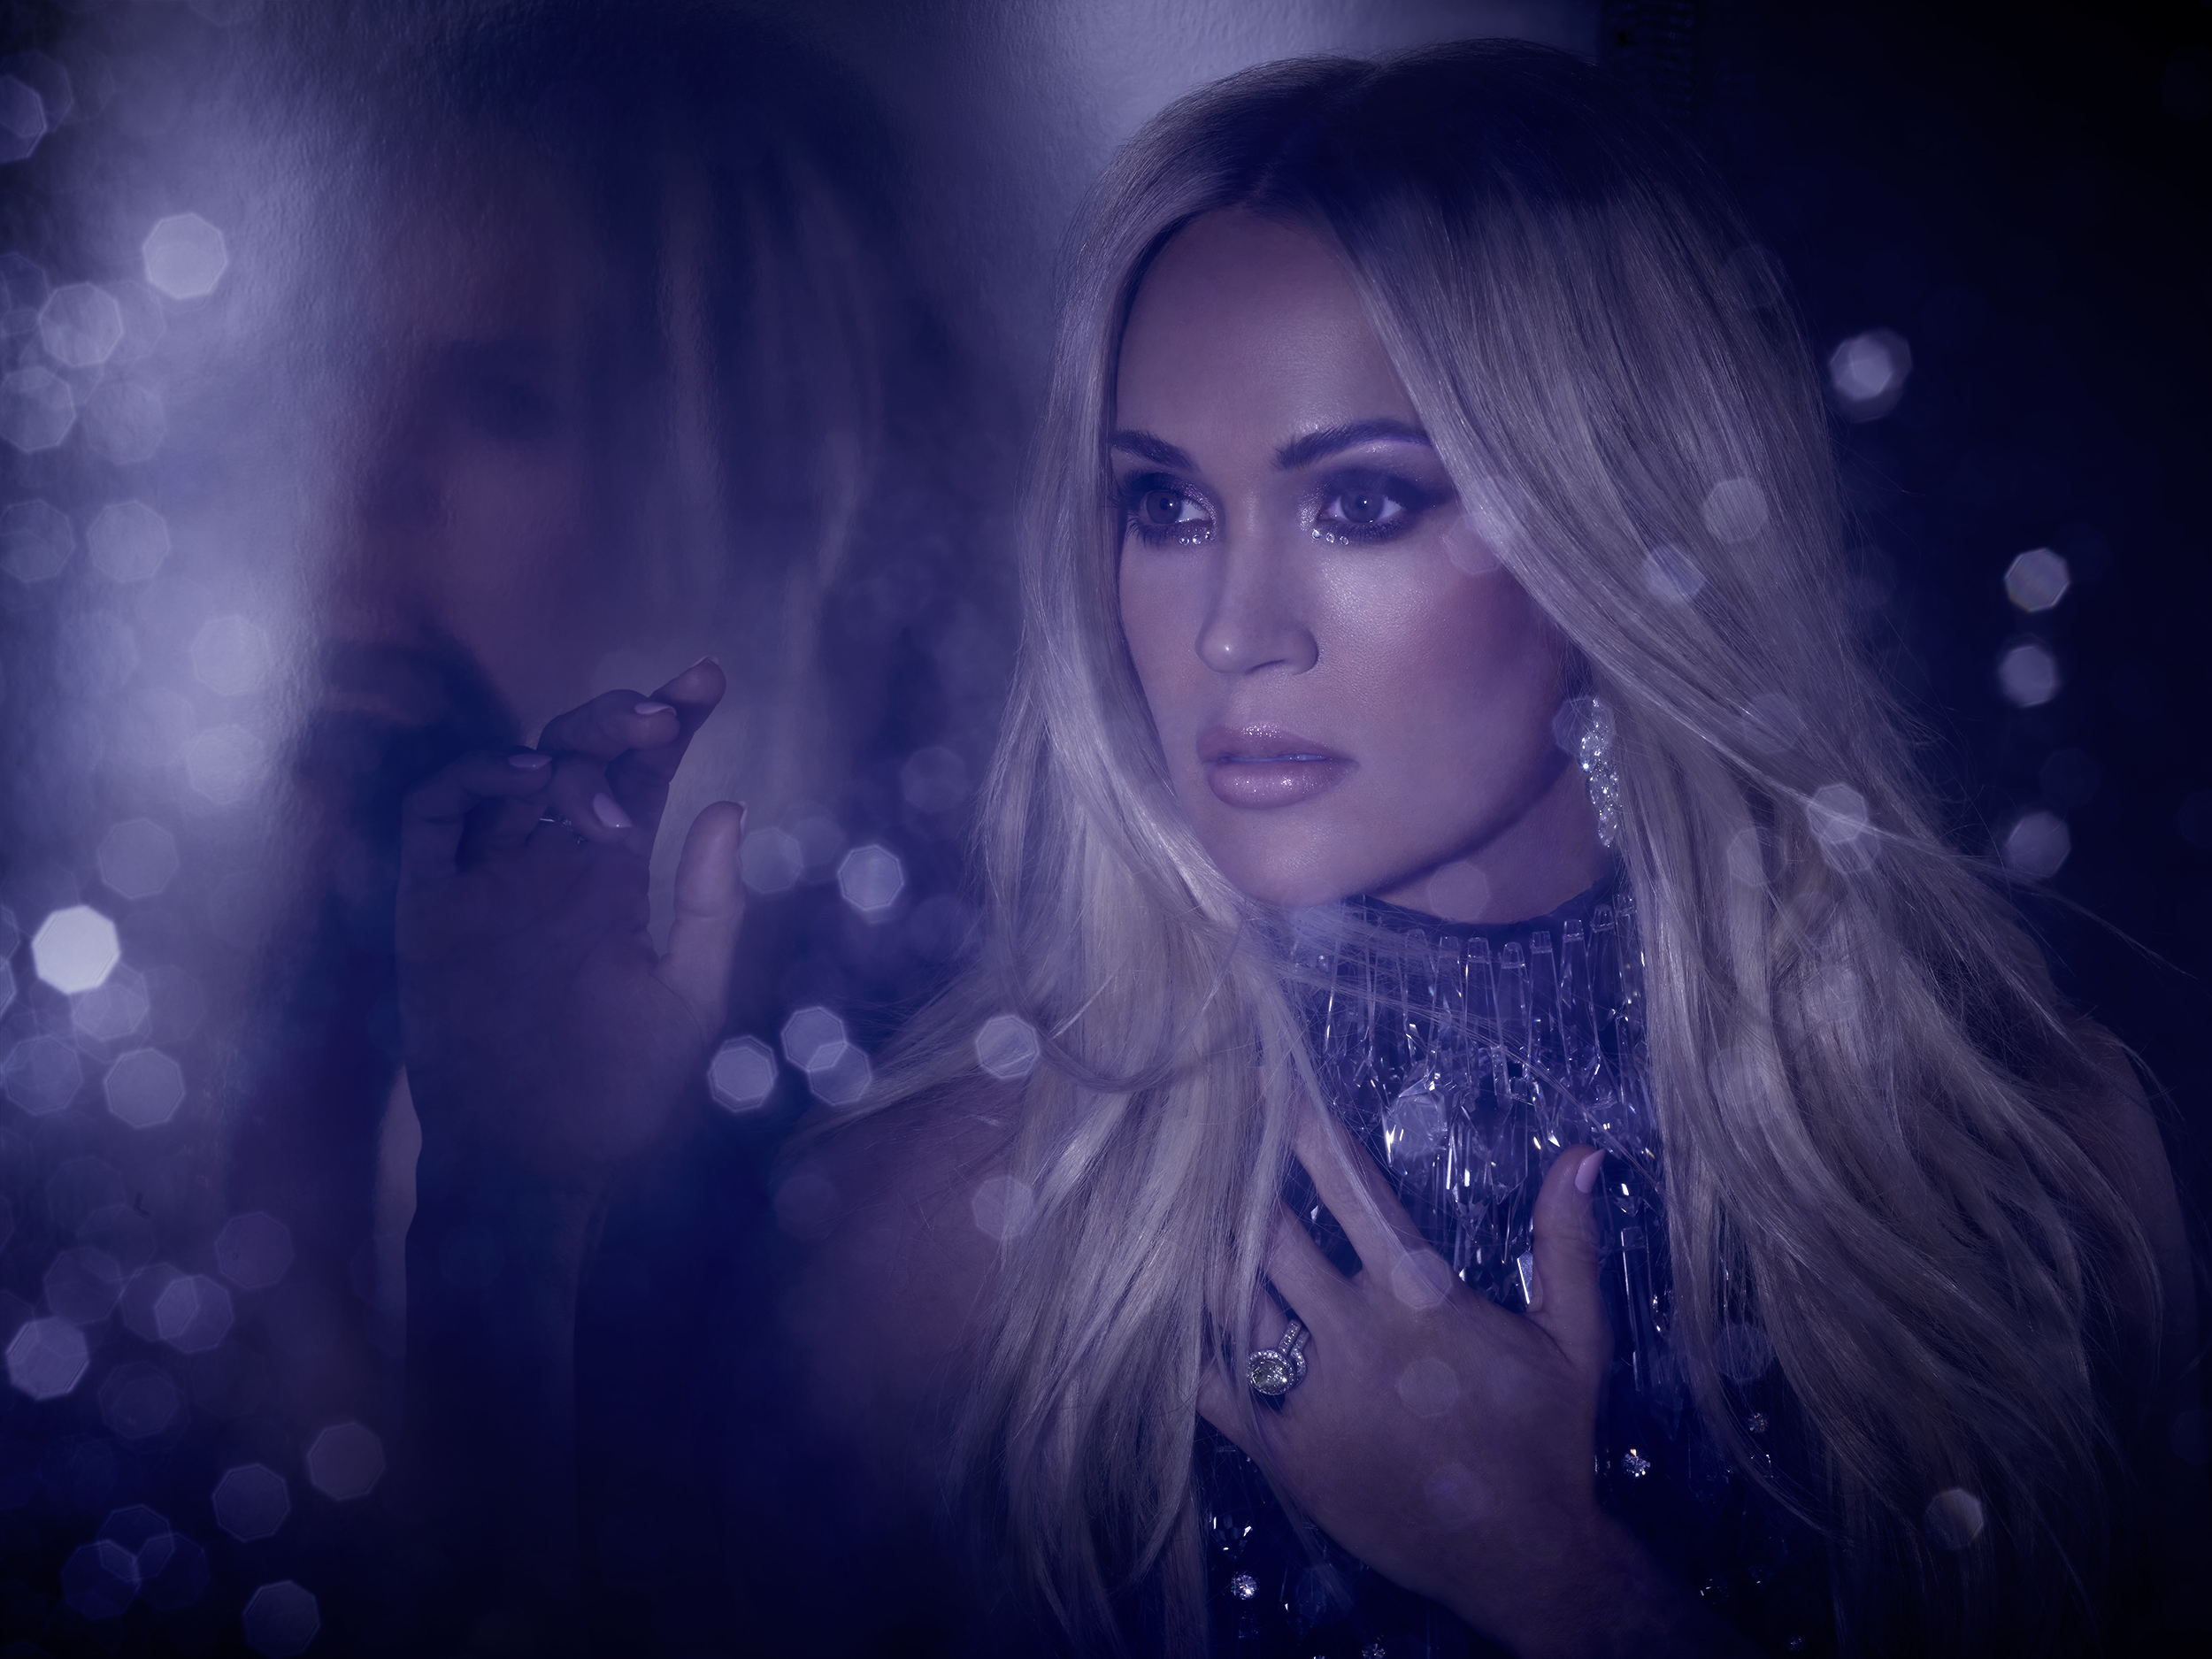 video of ghost story by carrie underwood